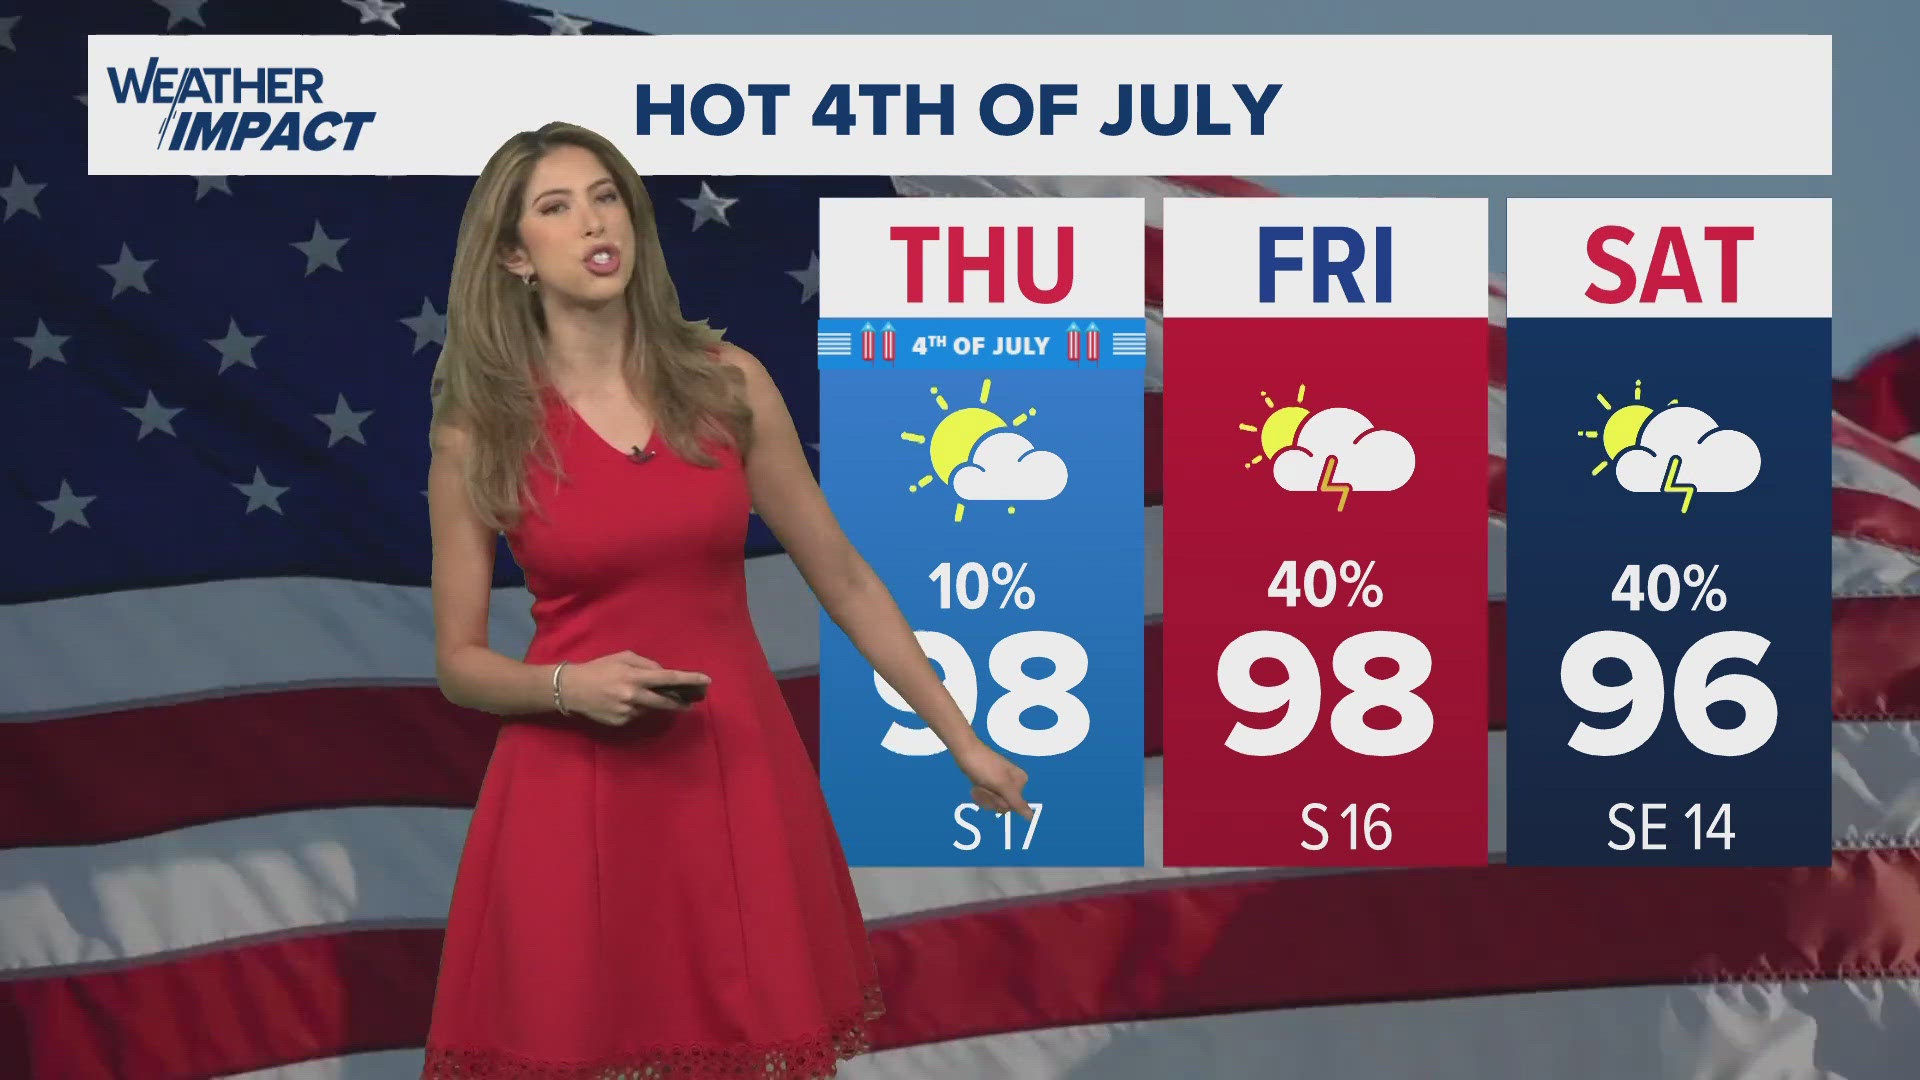 A Heat Advisory takes effect at noon with triple-digit feels-like temps for the Fourth of July holiday.